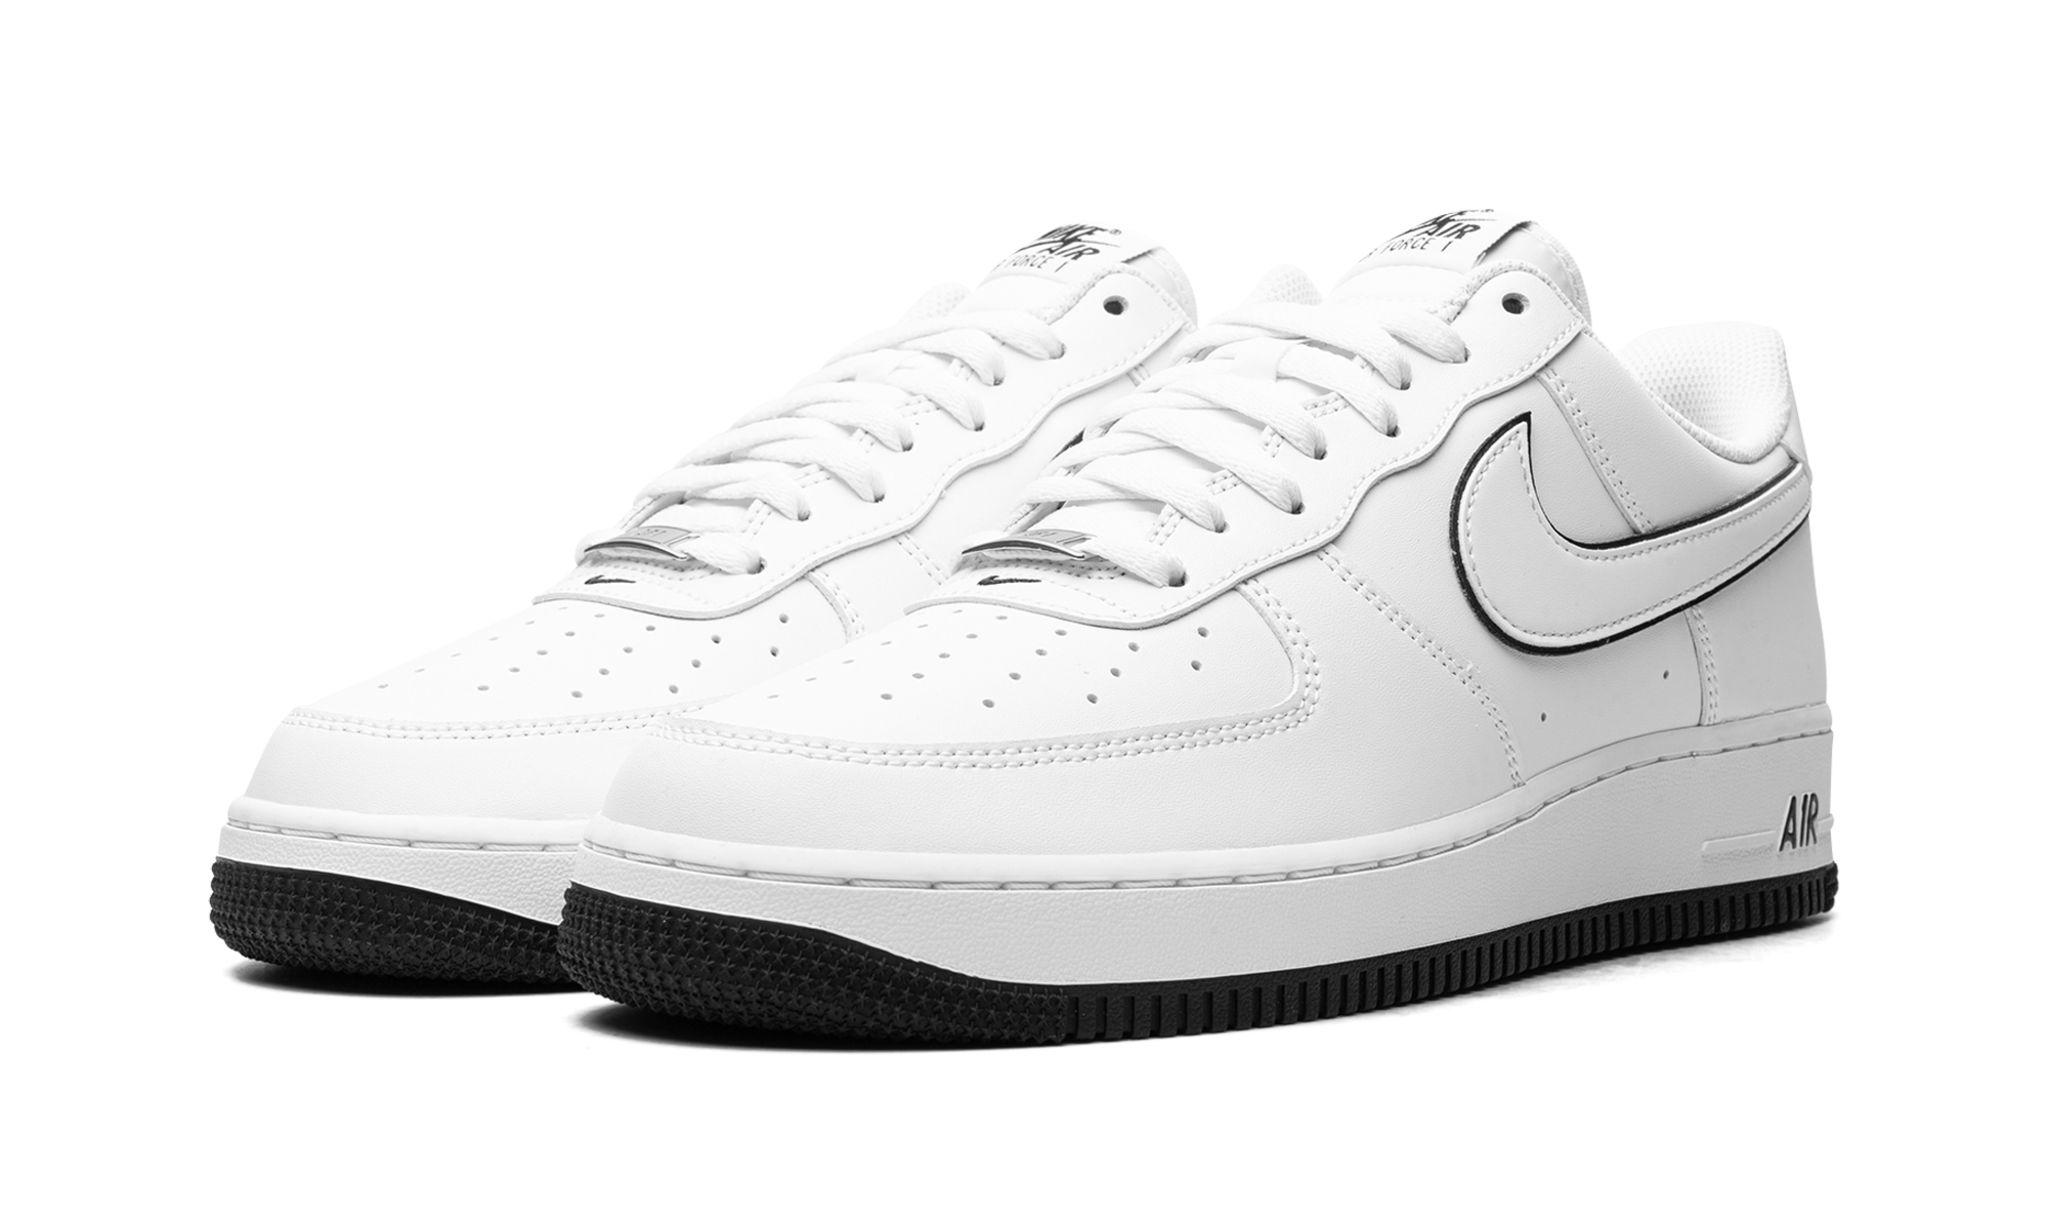 Nike Air Force 1 Low "white/black" Shoes | Lyst UK